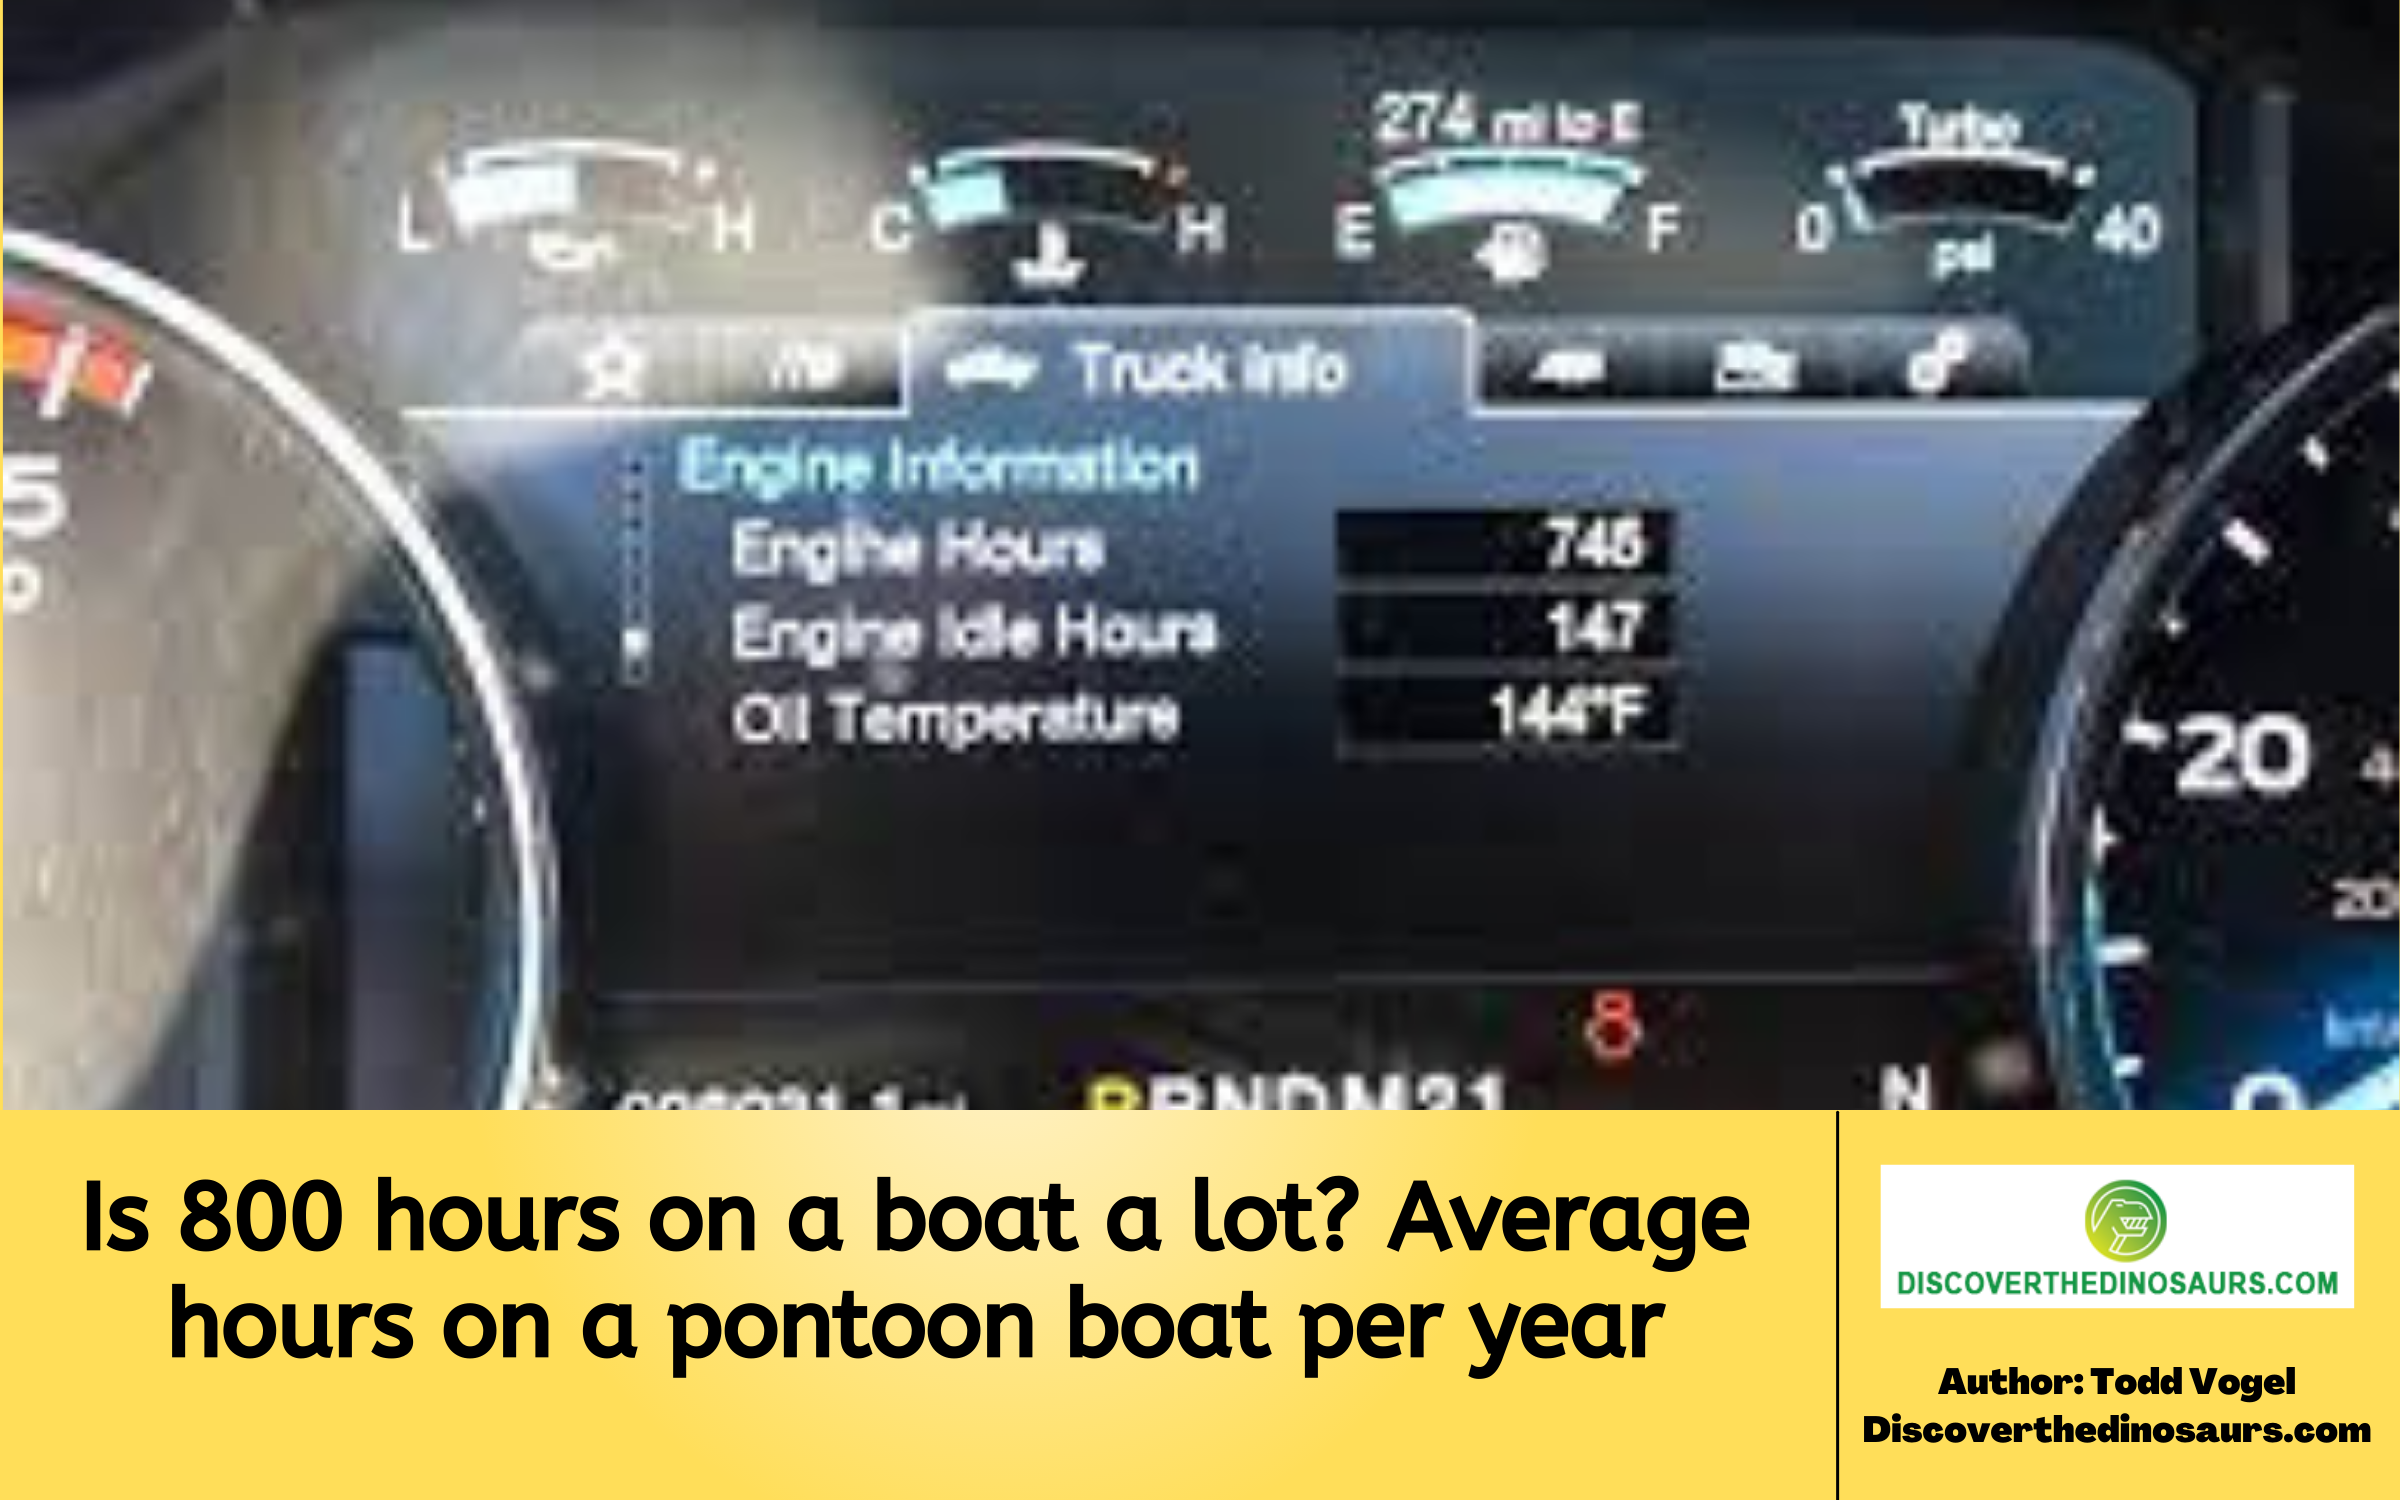 Is 800 hours on a boat a lot? Average hours on a pontoon boat per year